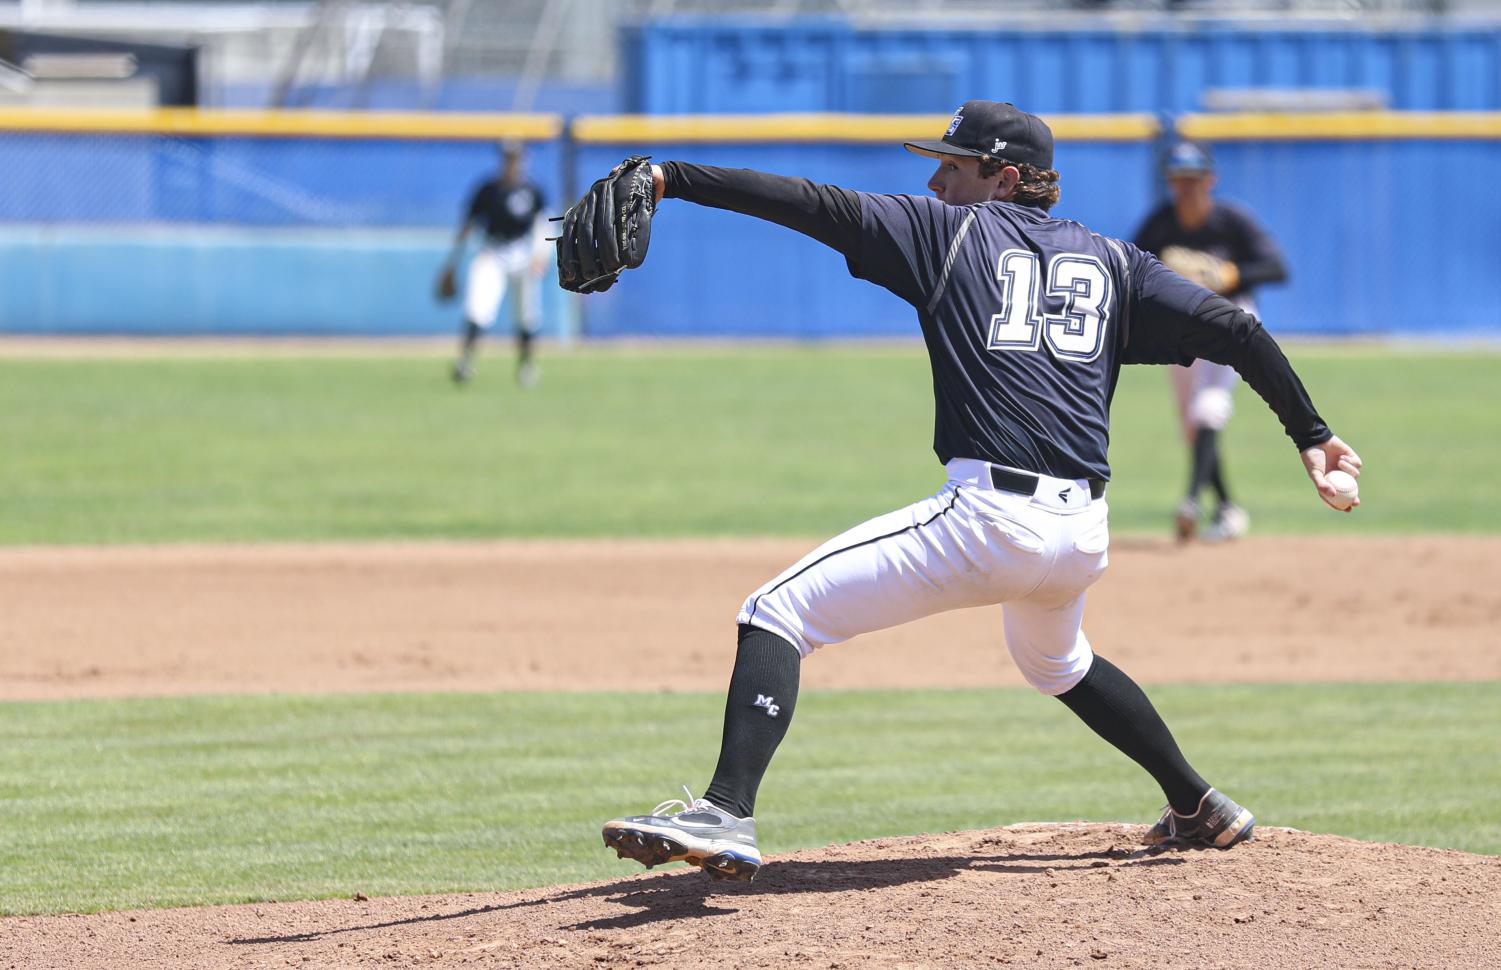 Moorpark Pitcher Lance Kinross throws a pitch during the home game against Oxnard College on Tuesday, May 27, 2021 at Moorpark College.